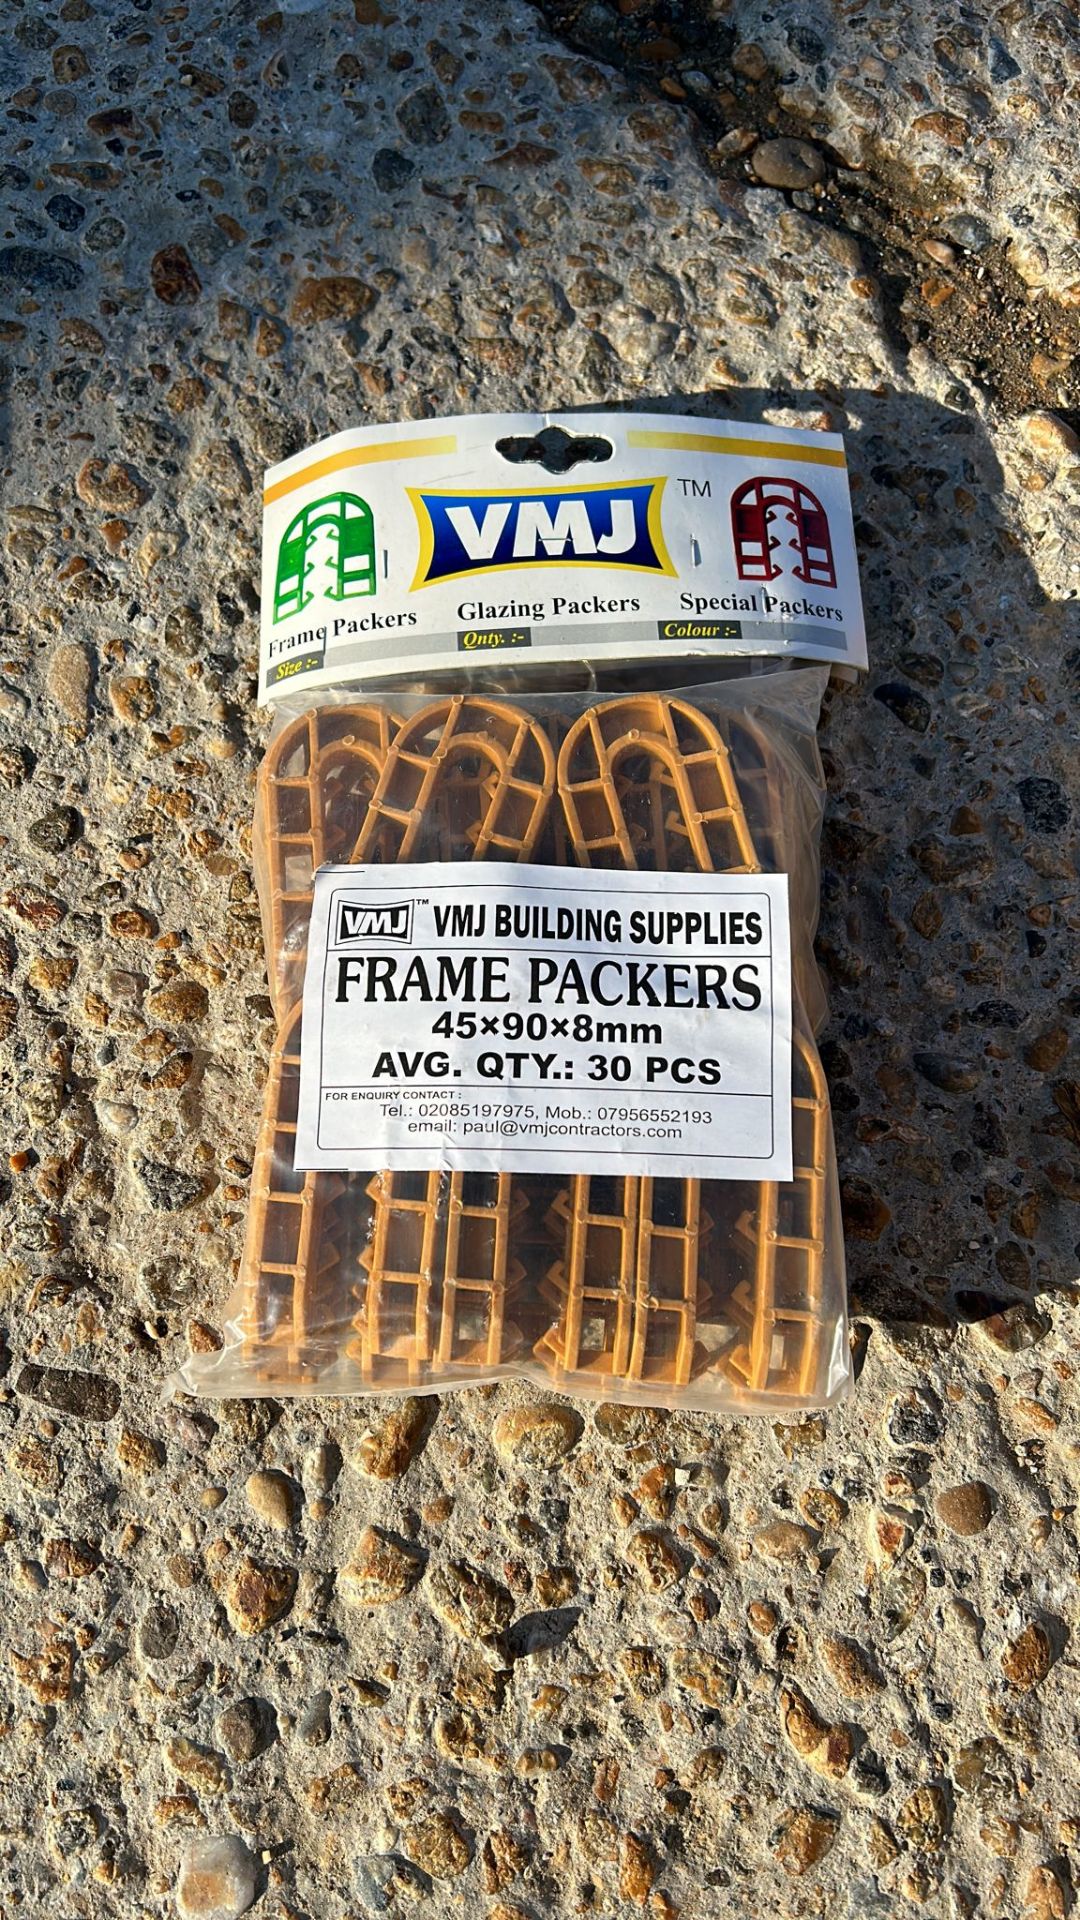 1 Box of Frame Packers, 8mm 45×90